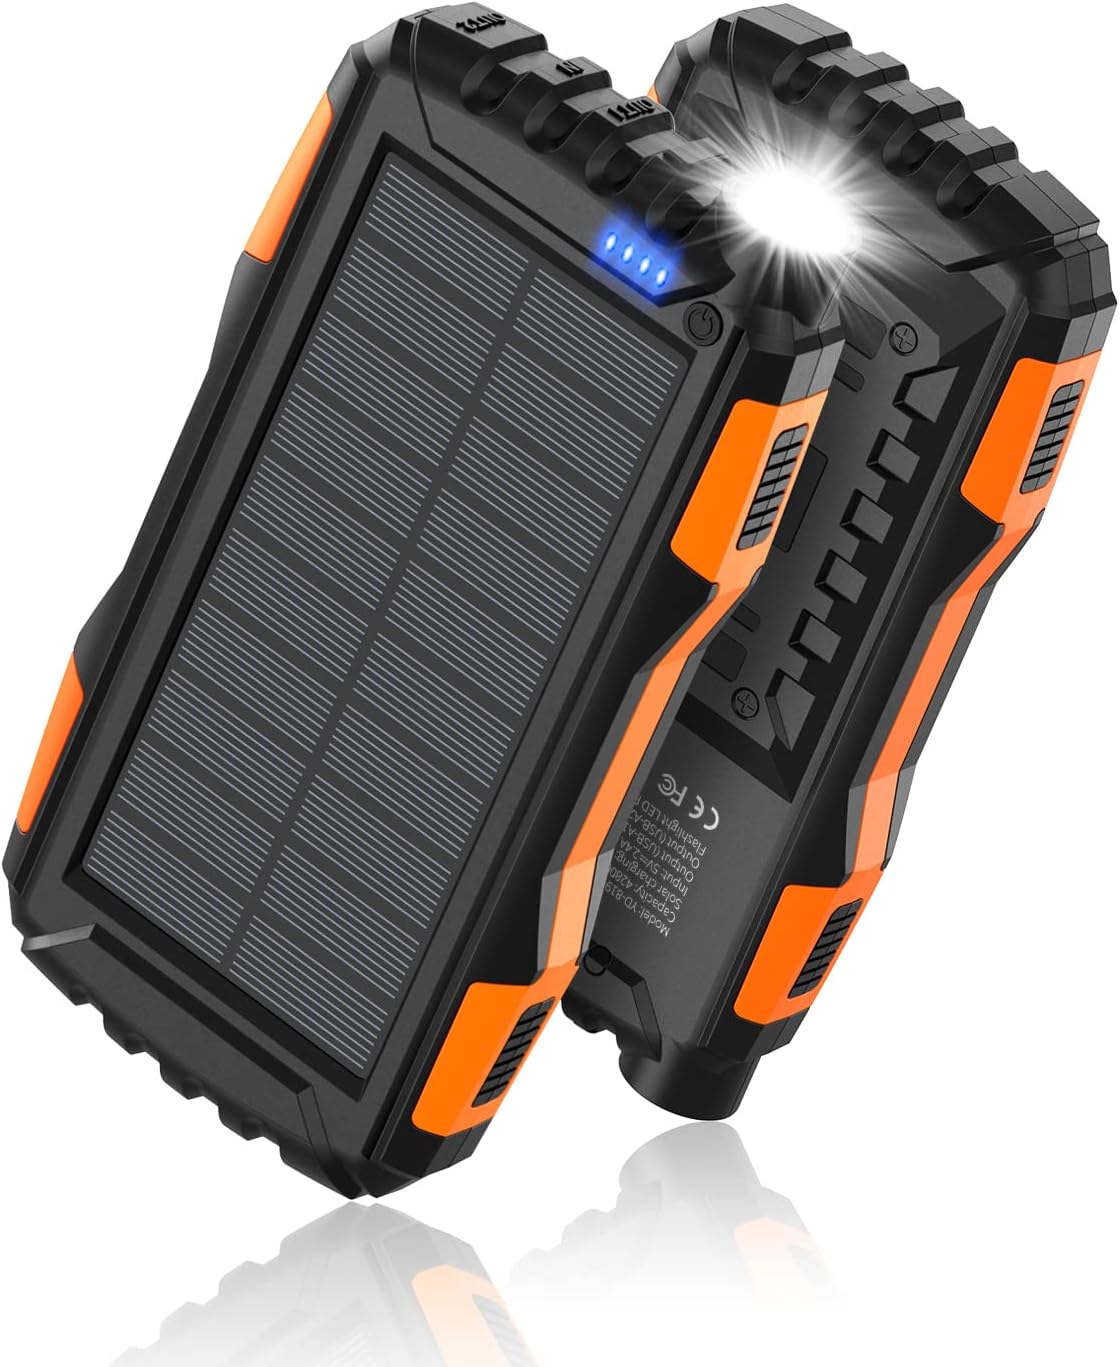 Power-Bank-Solar-Charger